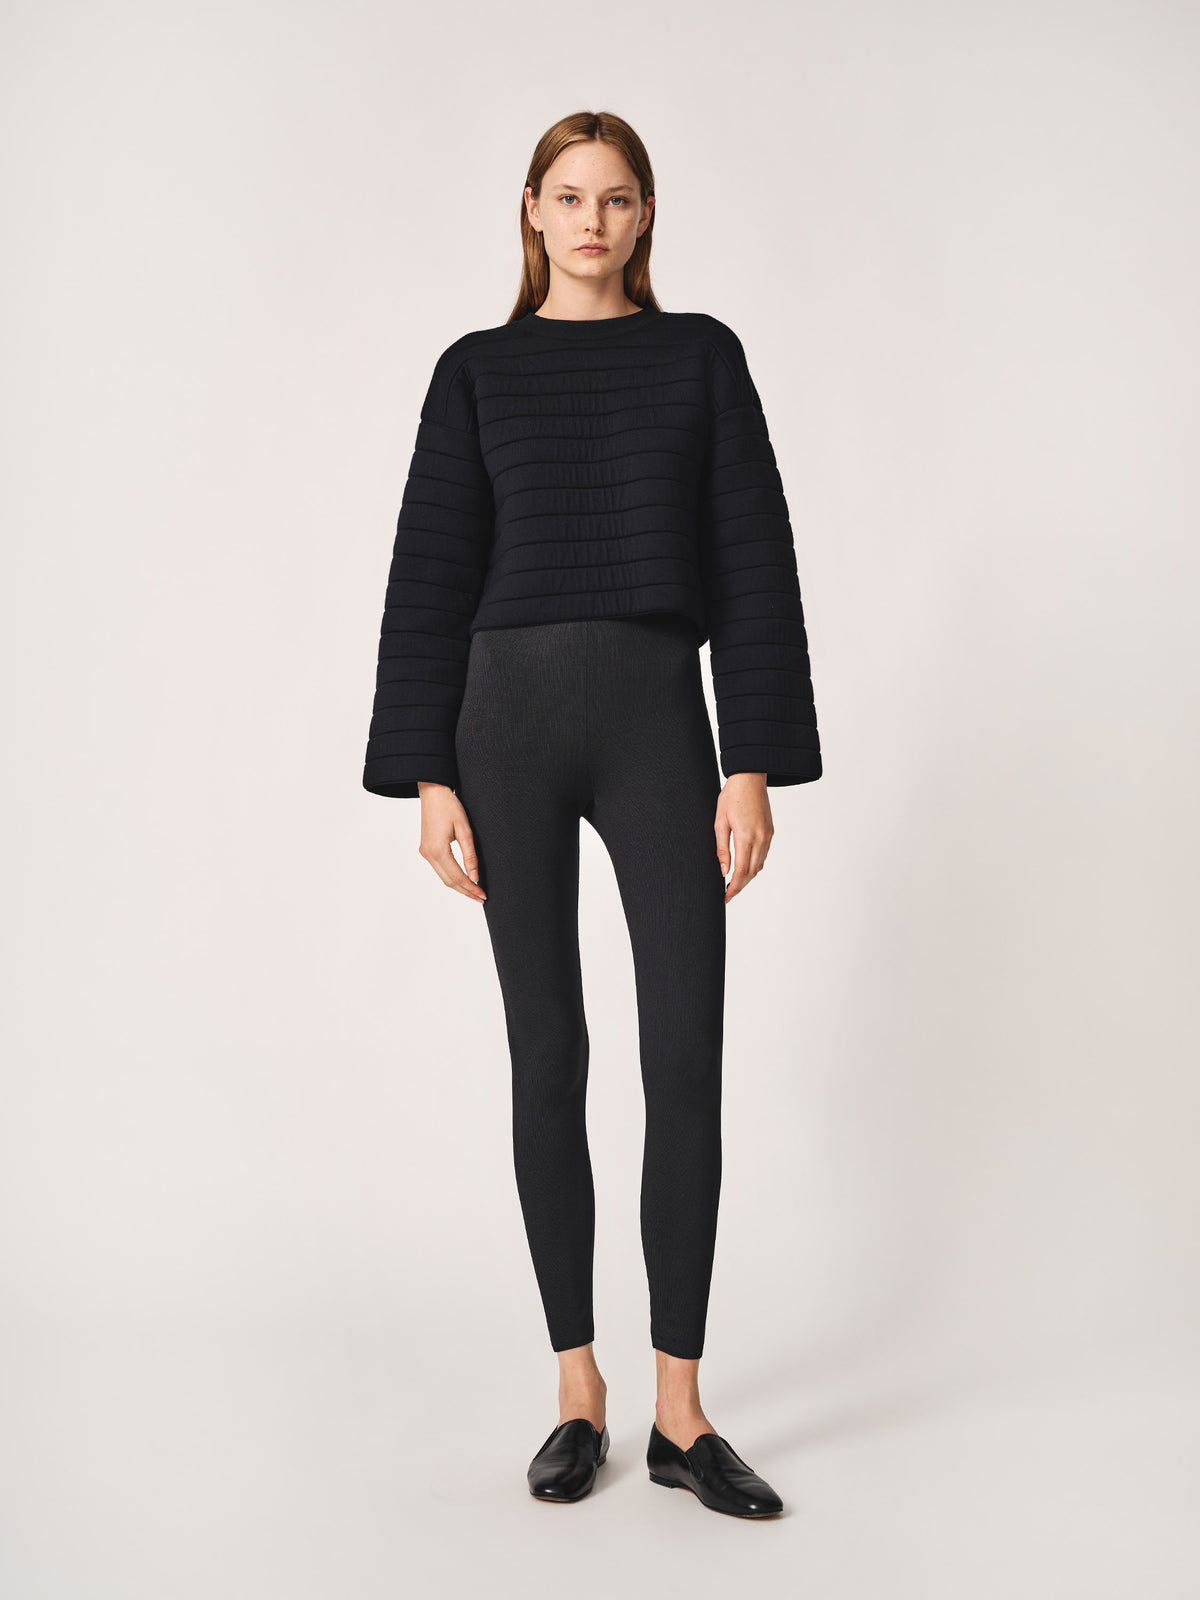 AVERY double knit cropped sweater